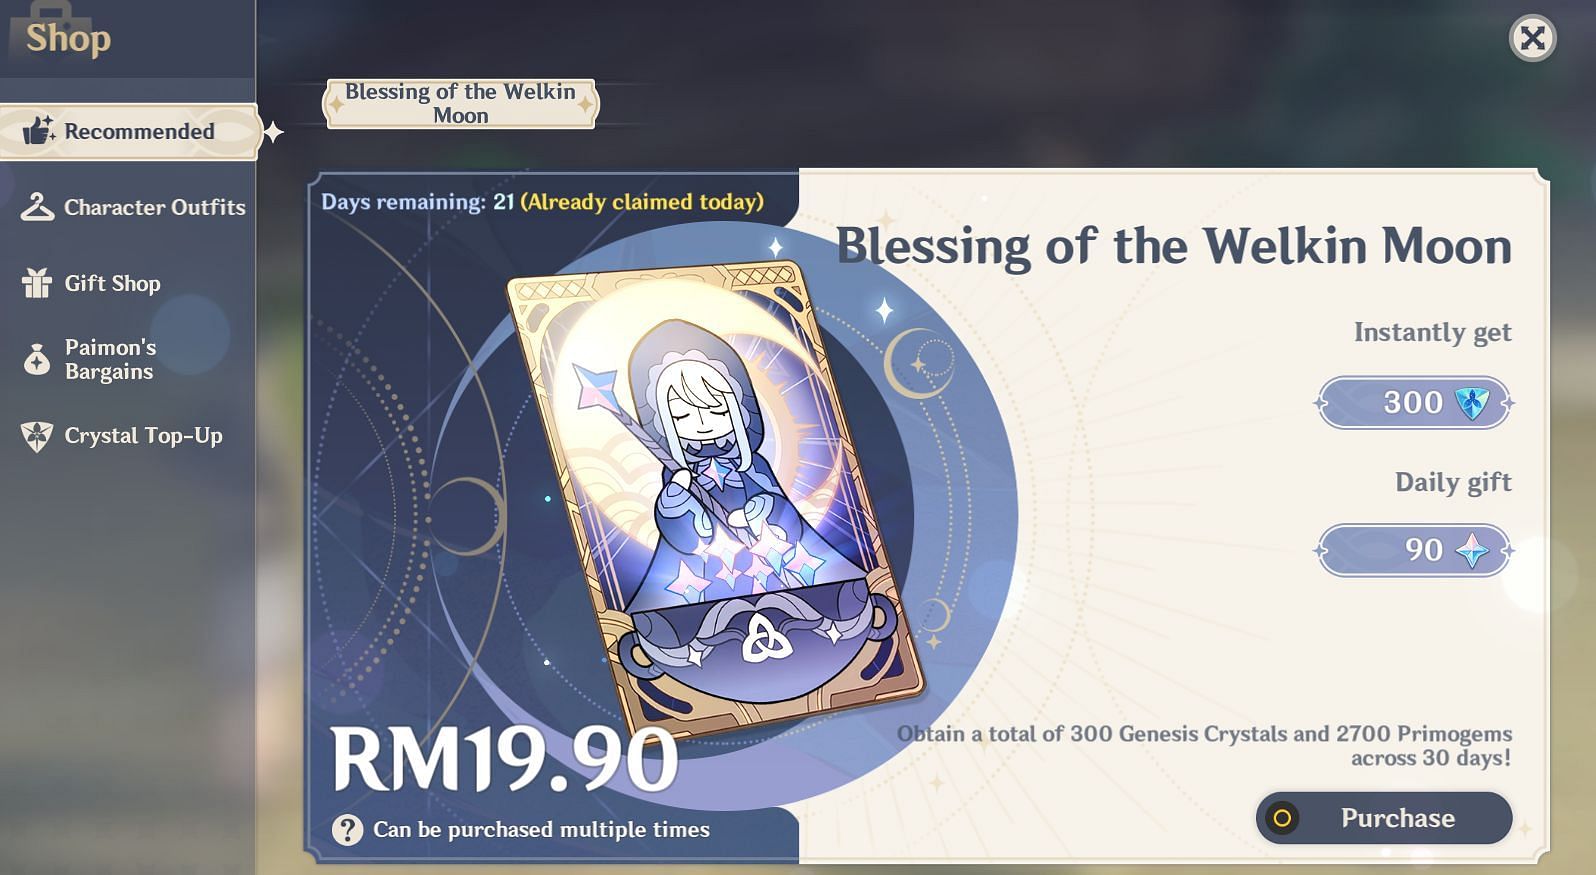 Blessing of the Welkin Moon in Shop (Image via Genshin Impact)